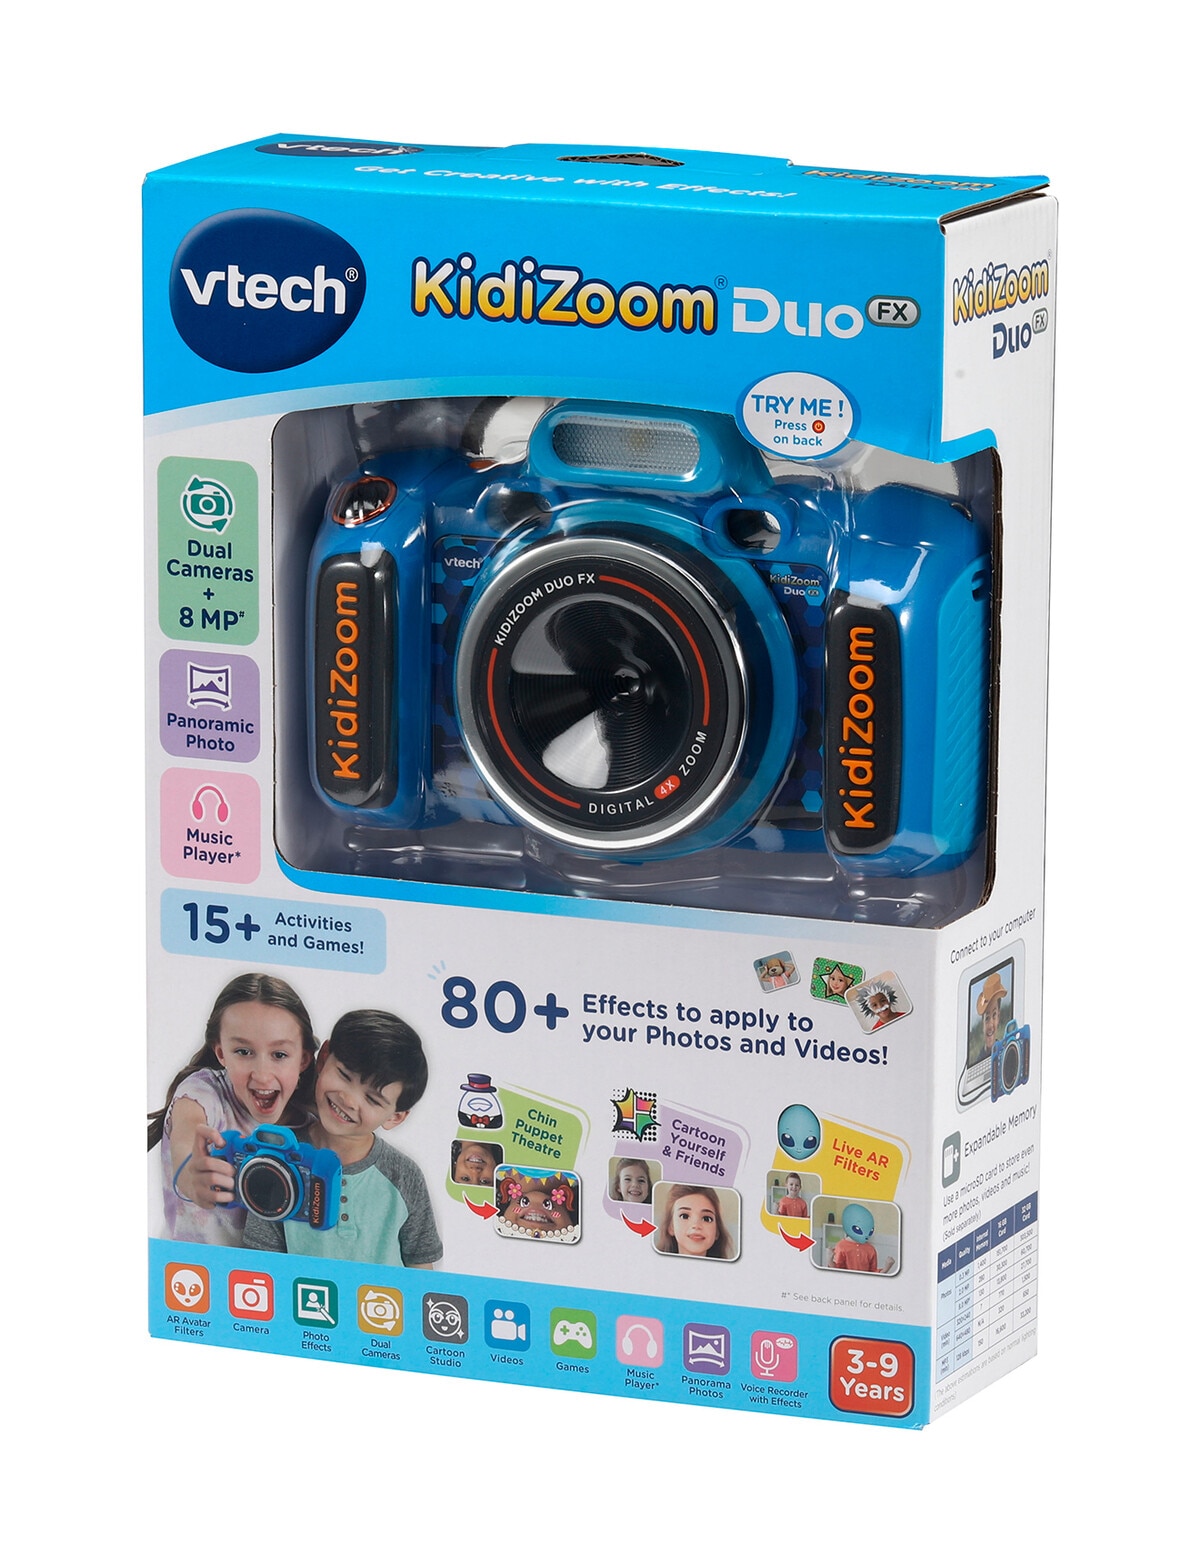 Vtech Kidizoom Duo FX, Blue - Science & Electronic Toys